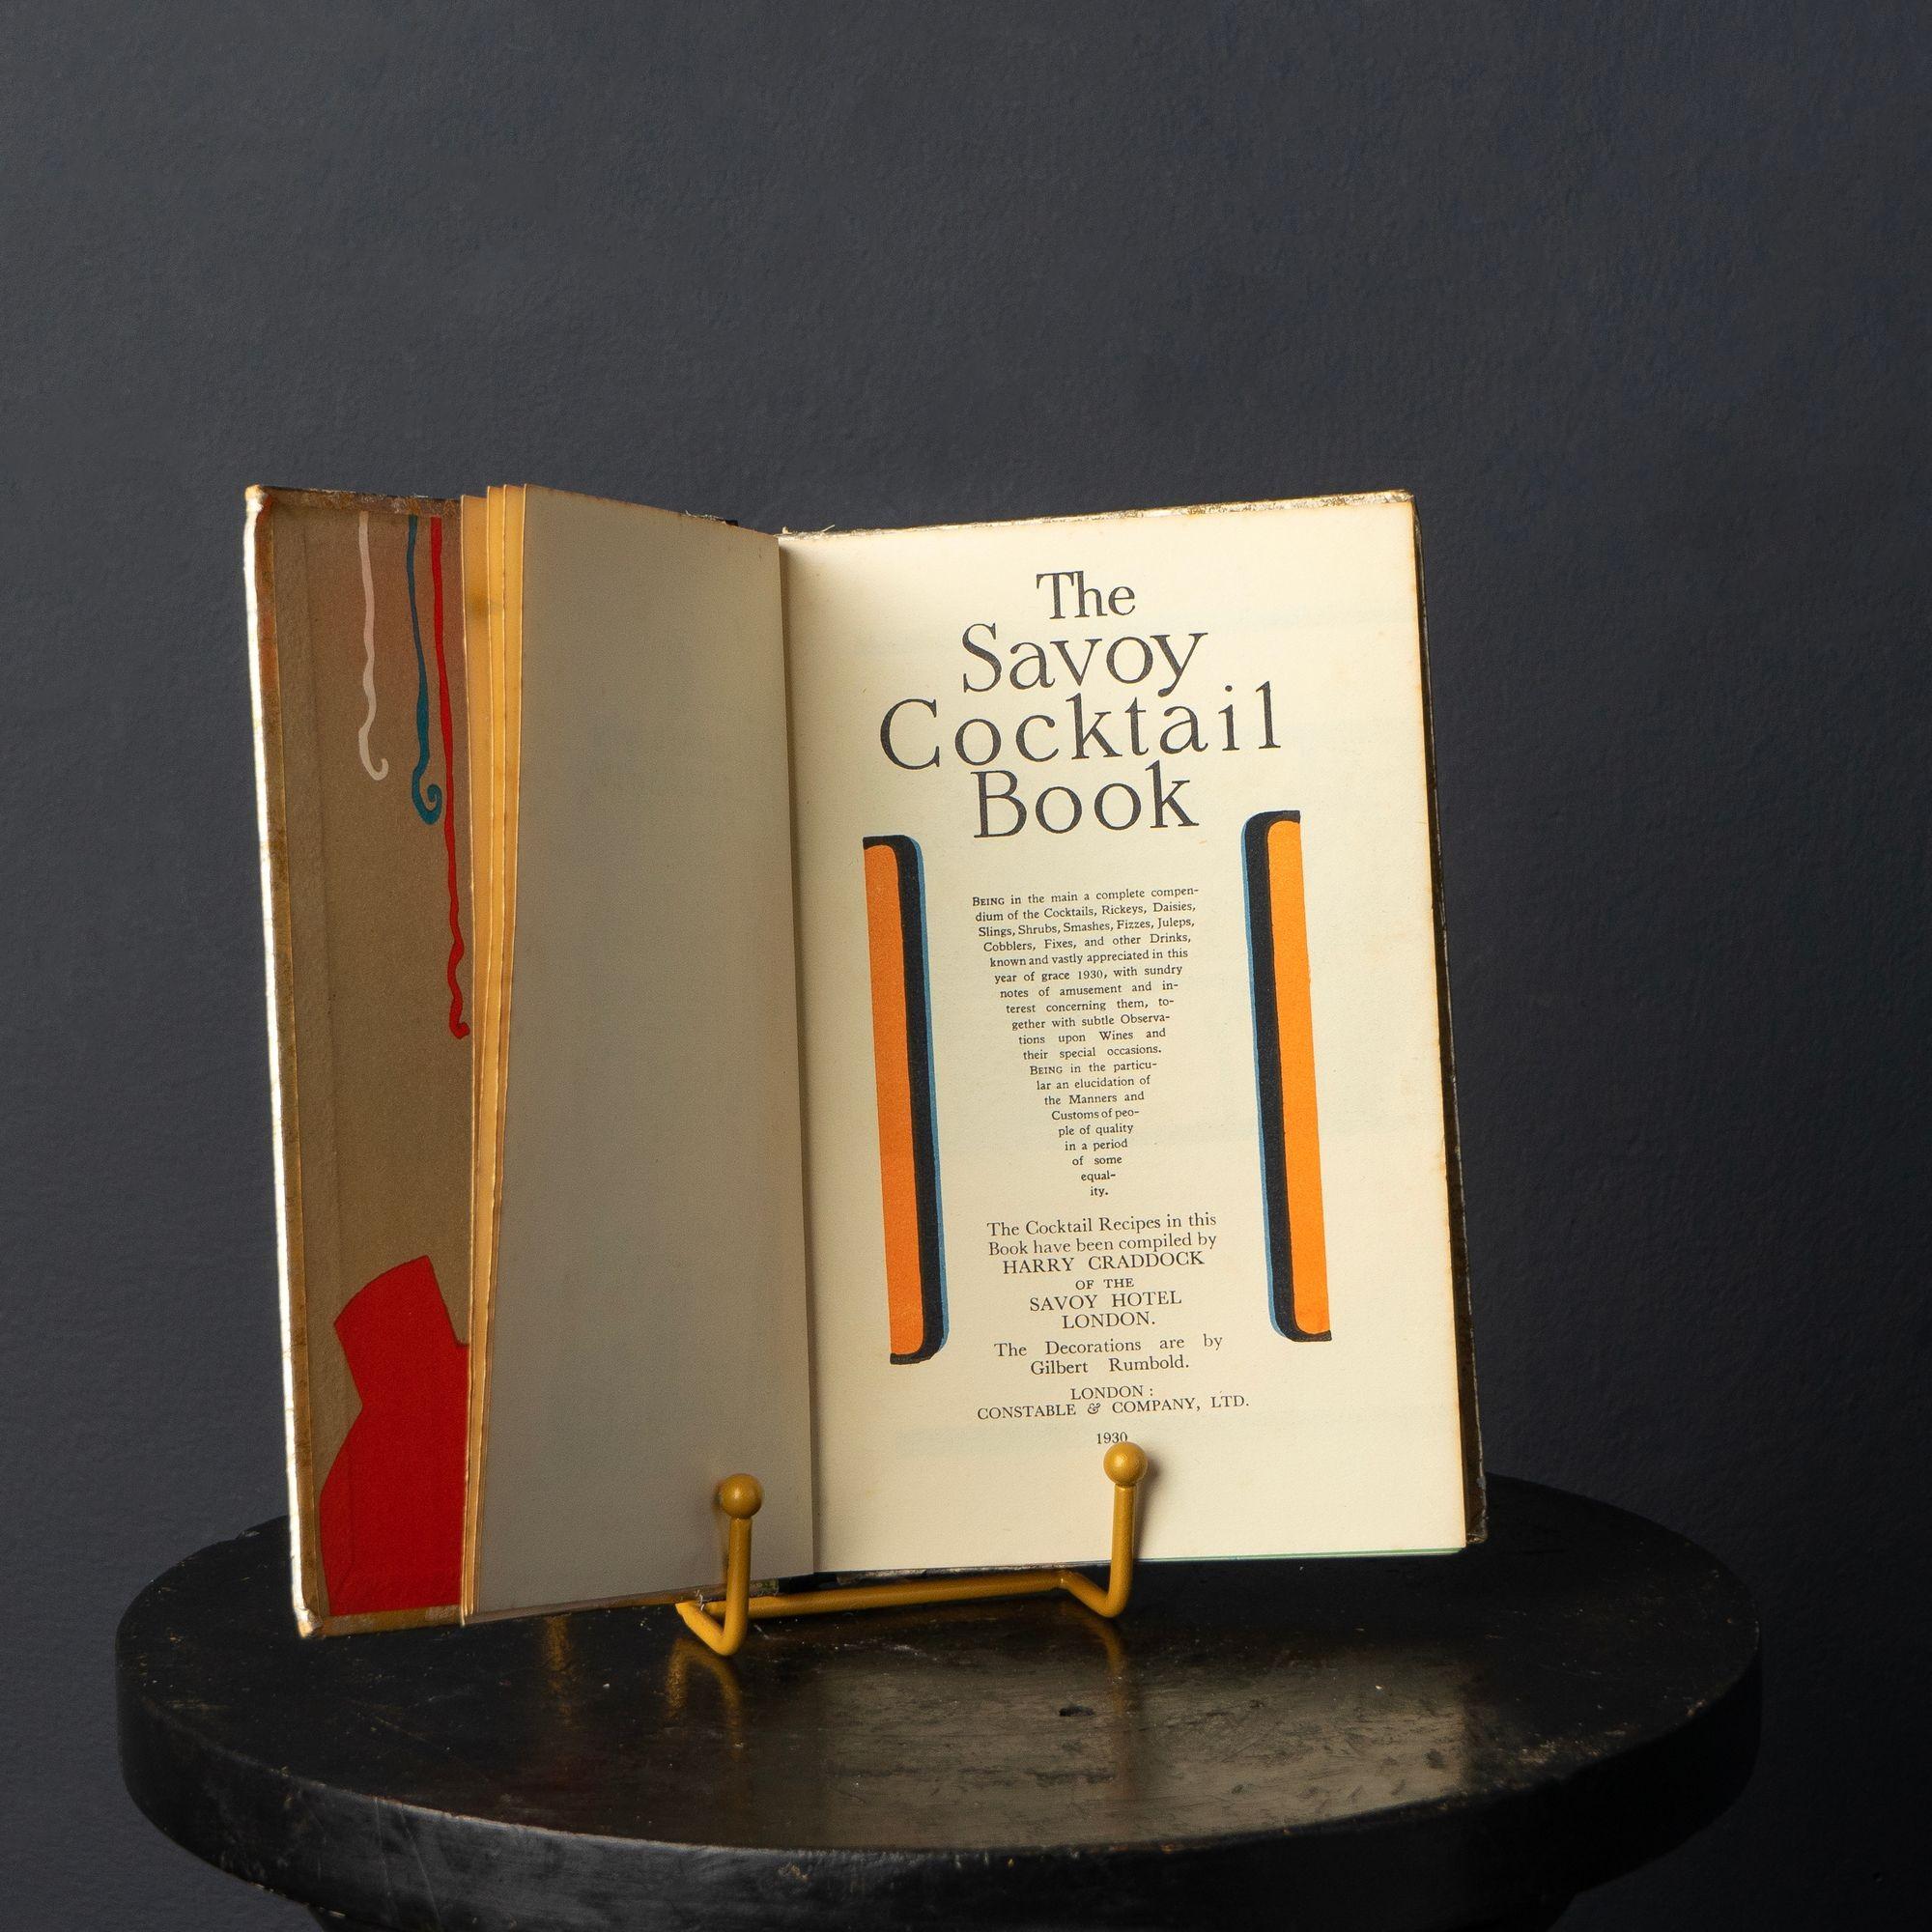 British The savoy cocktail book by harry craddock, first edition 1930